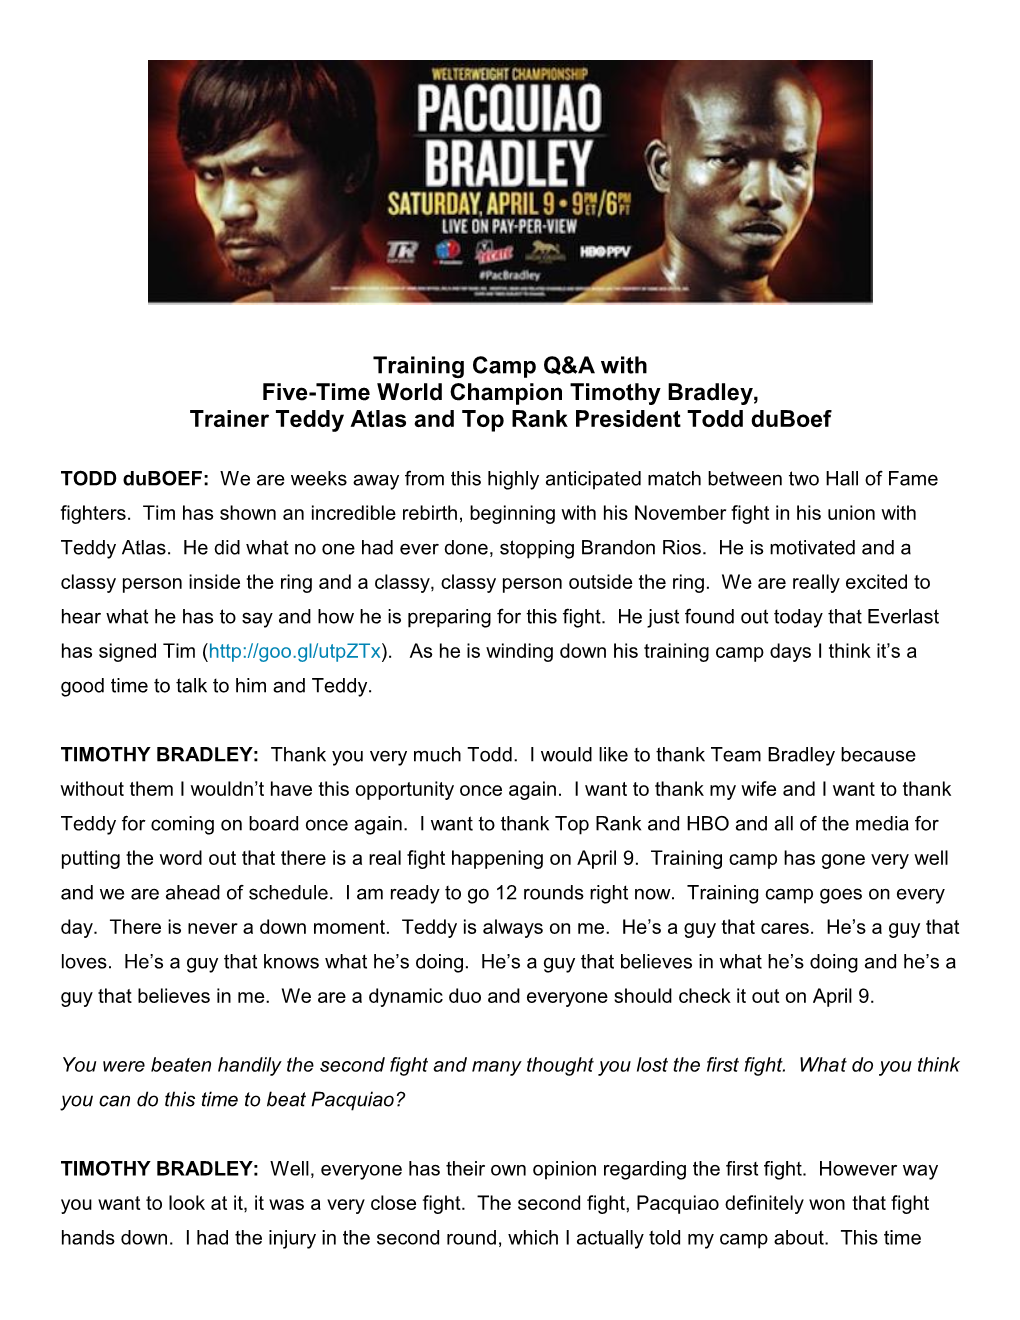 Training Camp Q&A with Five-Time World Champion Timothy Bradley